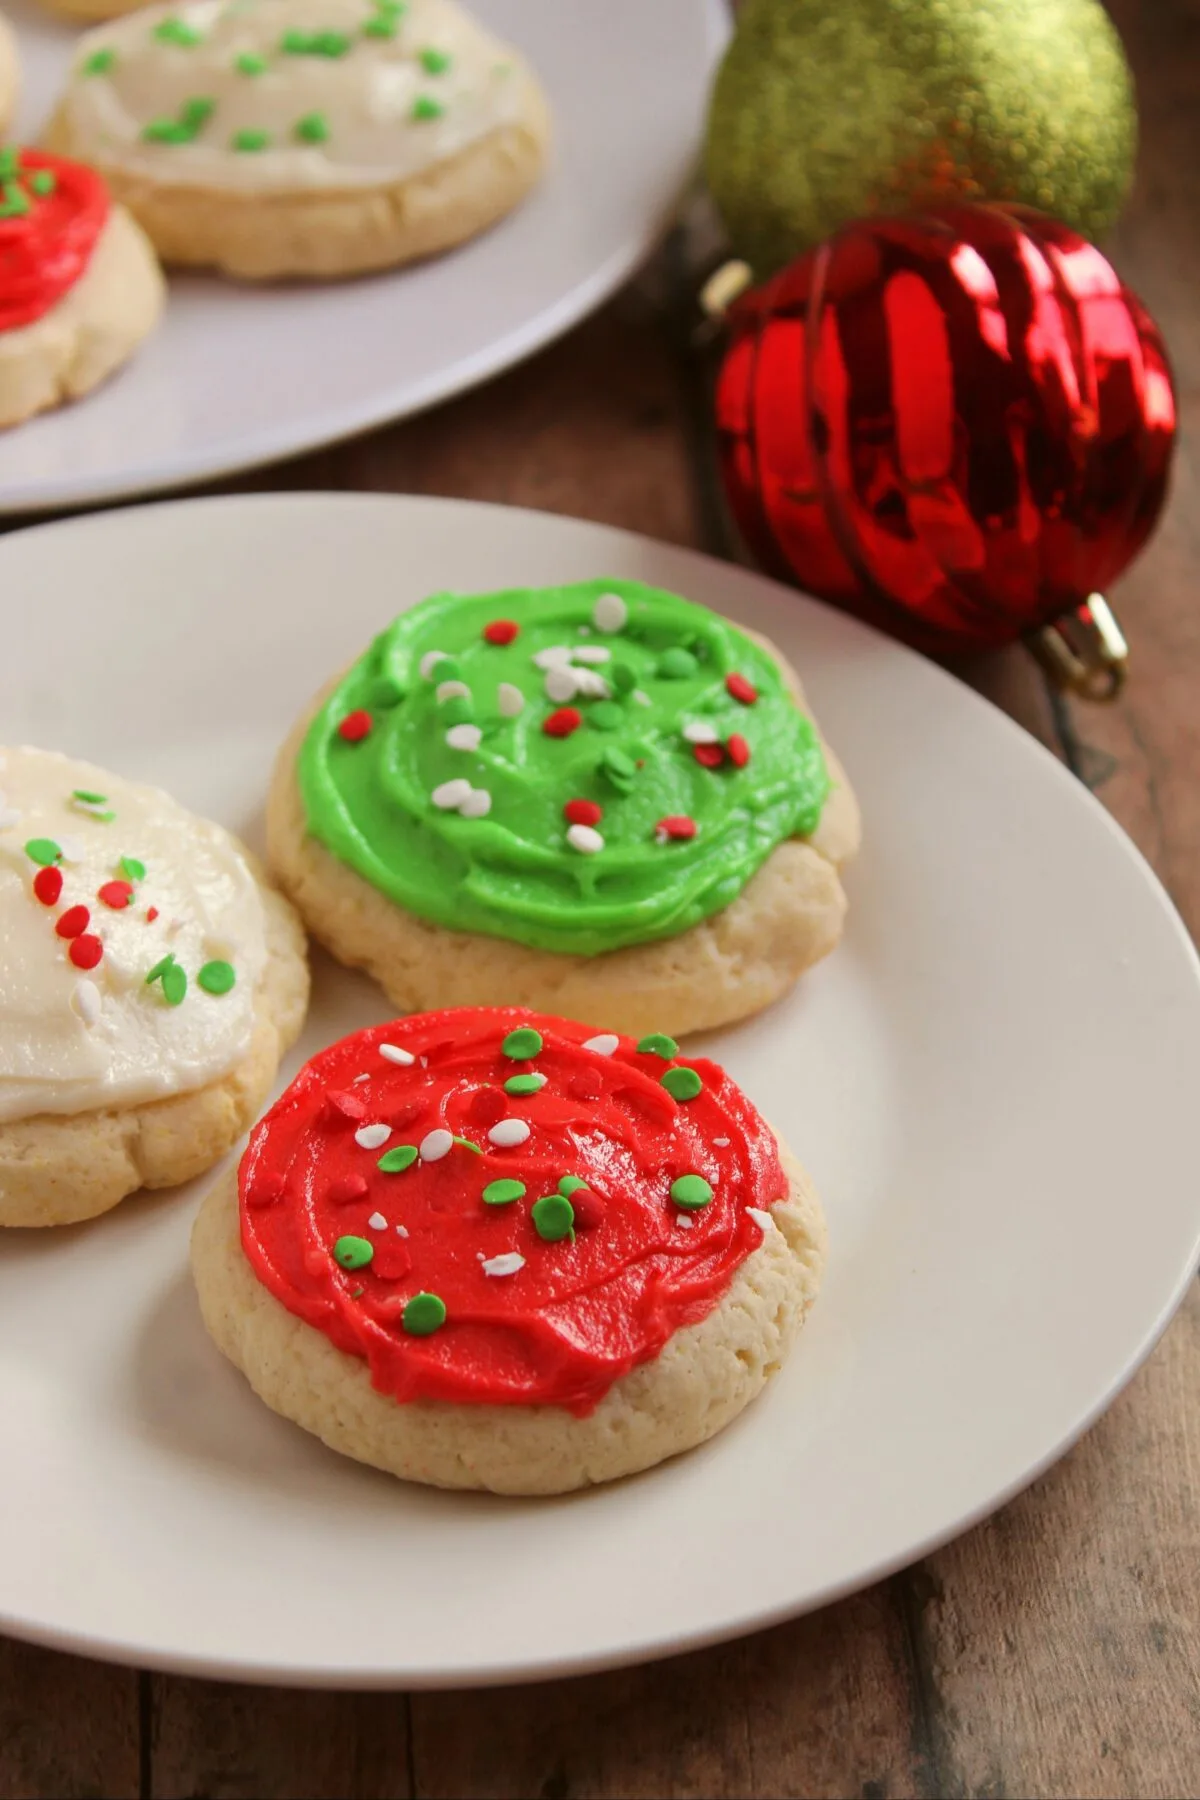 My copycat recipe for the famous Lofthouse frosted sugar cookies. These soft and cakey cookies are a must have around Christmas time!